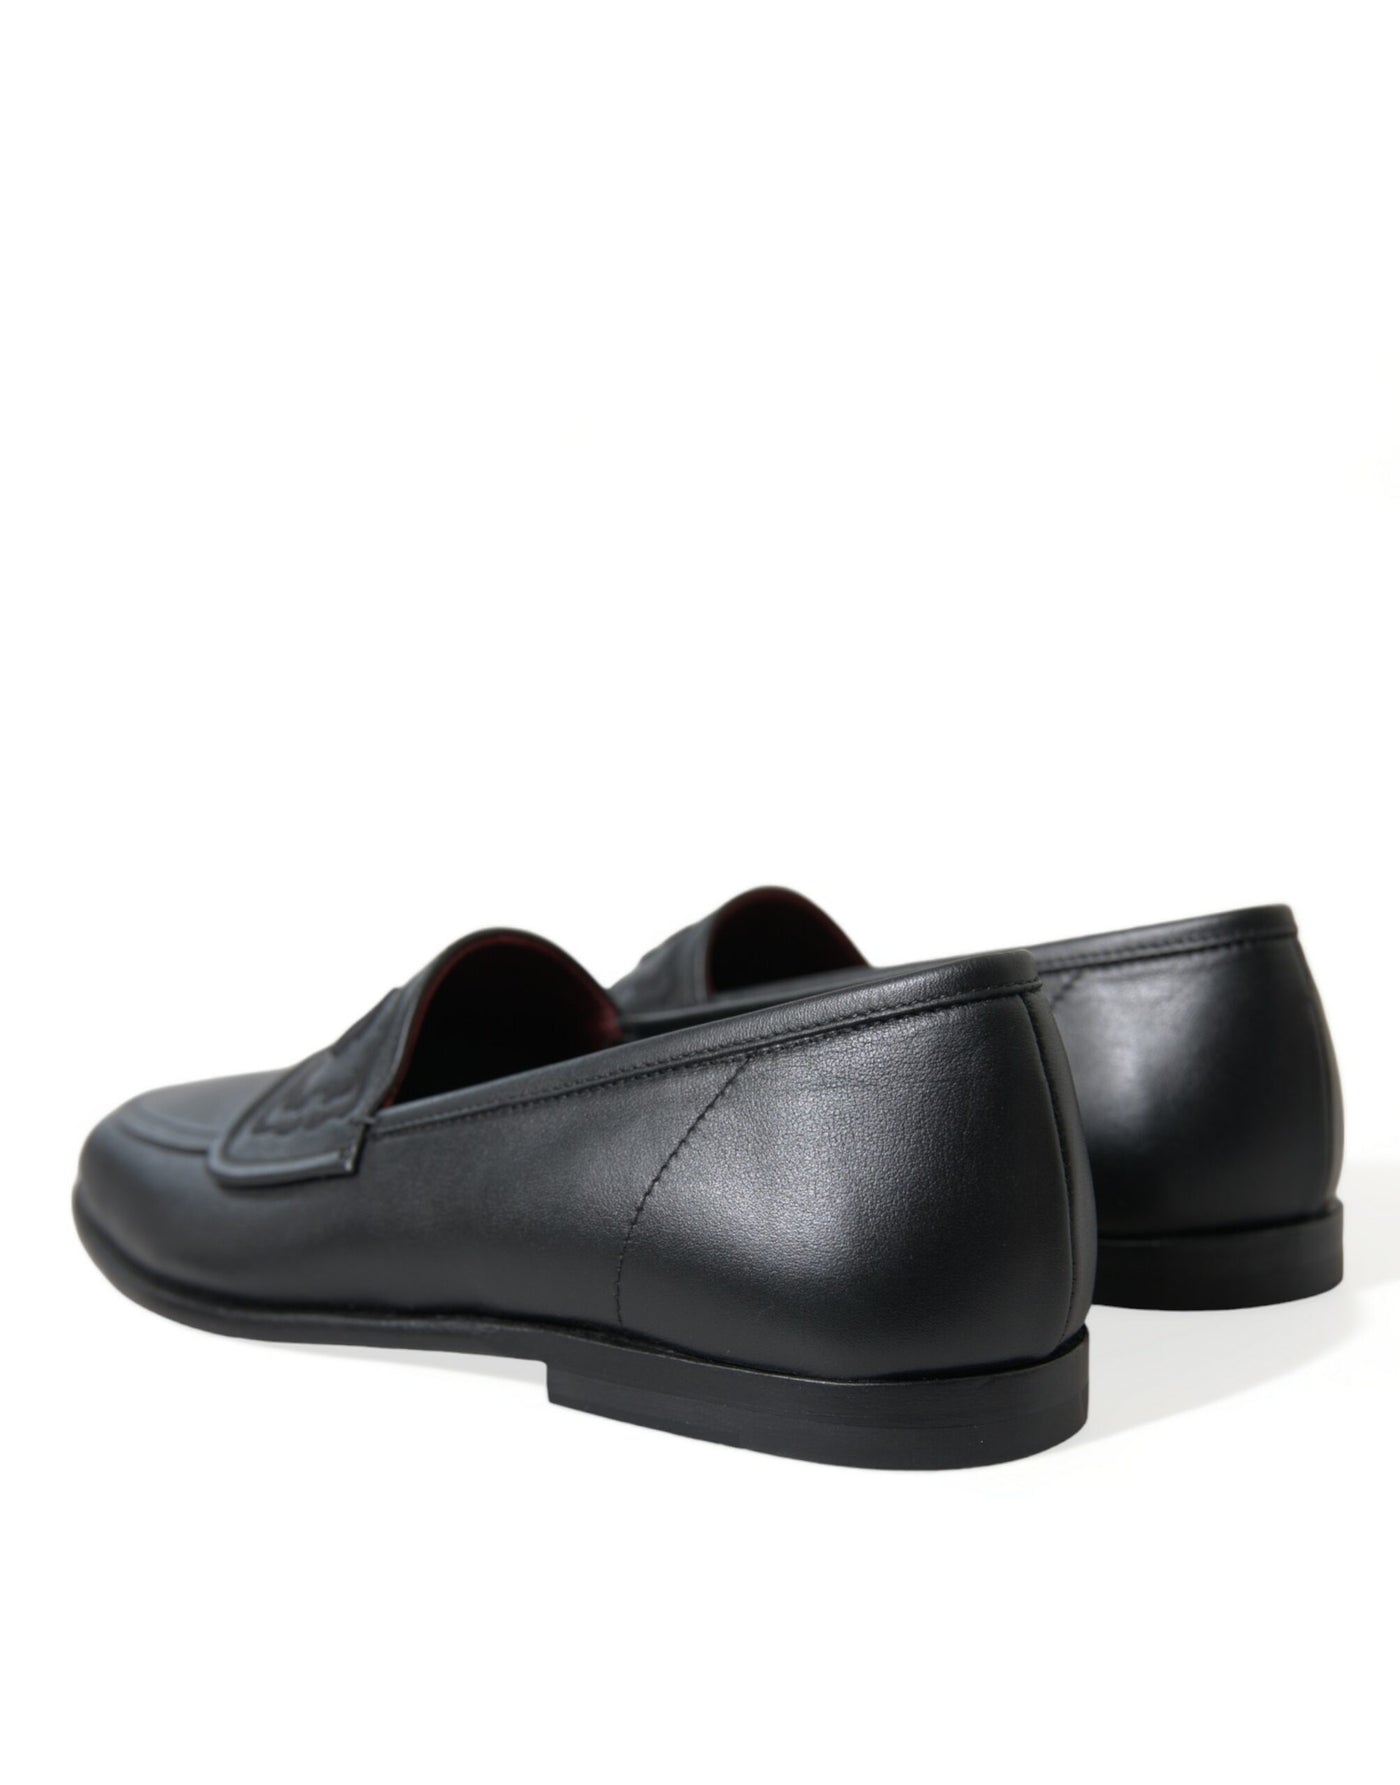 Dolce & Gabbana Black Leather Logo Embroidery Loafers Dress Shoes